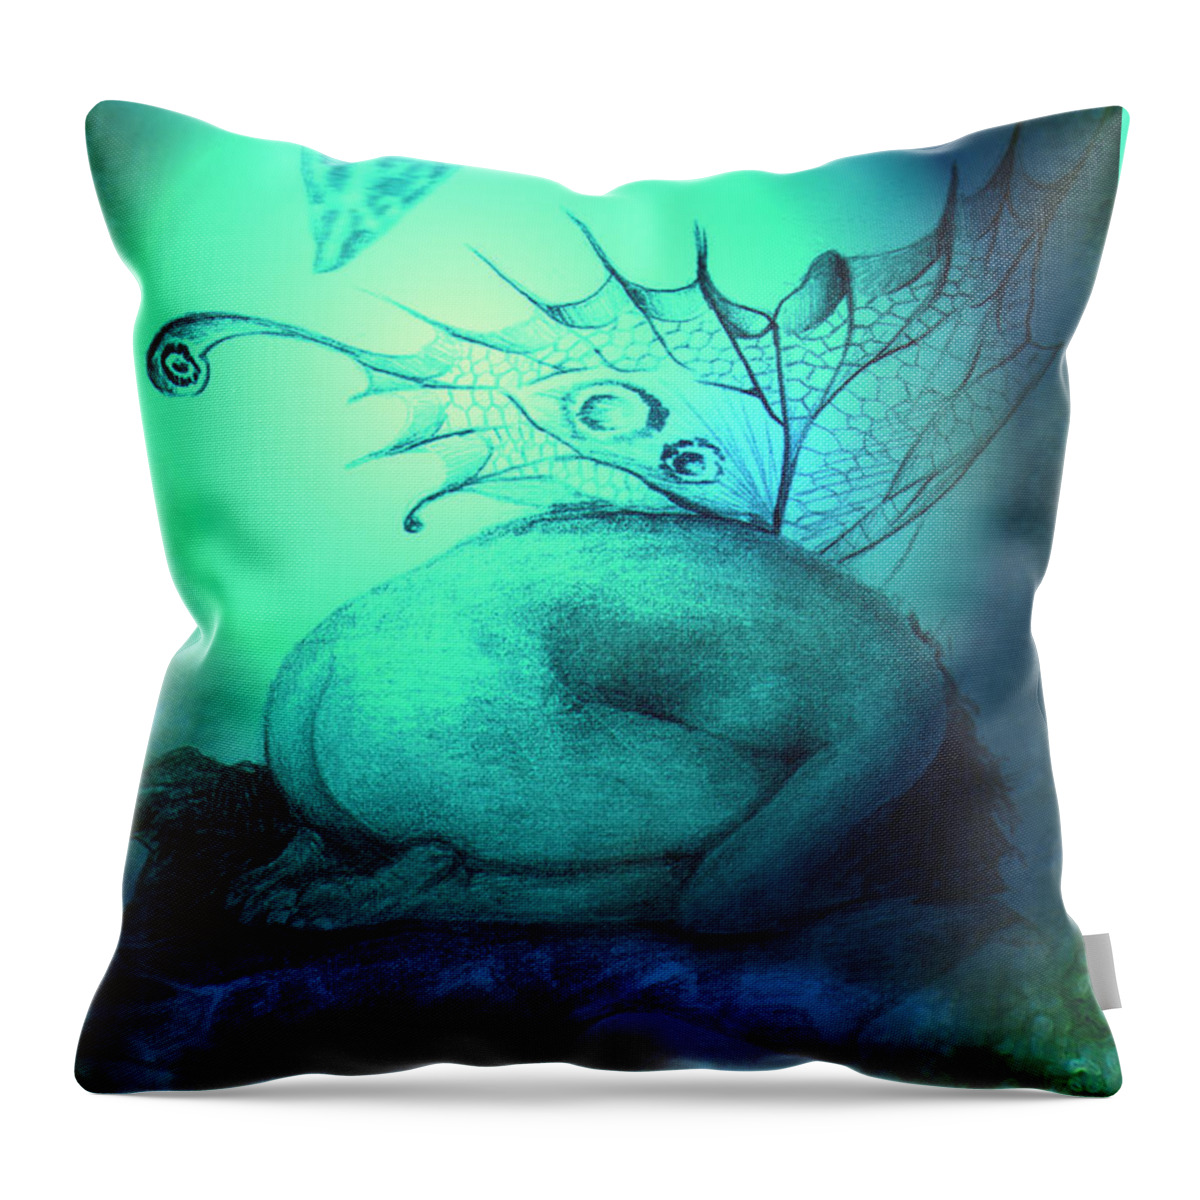 Crying Fairy Throw Pillow featuring the painting Crying Fairy by Ragen Mendenhall